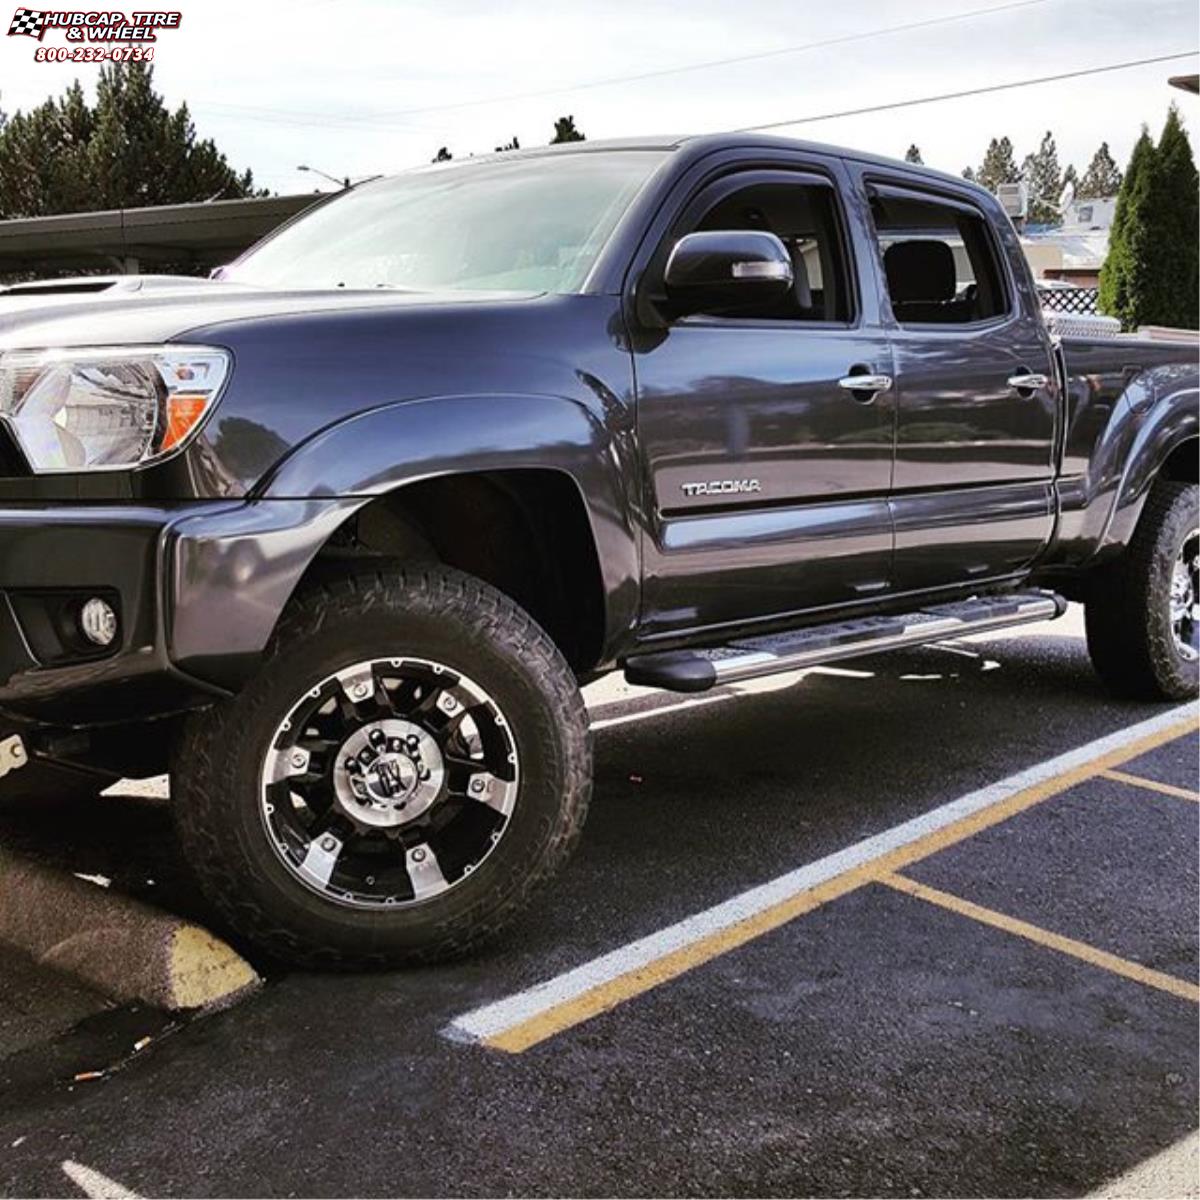 vehicle gallery/toyota tacoma xd series xd797 spy x  Gloss Black Machined wheels and rims